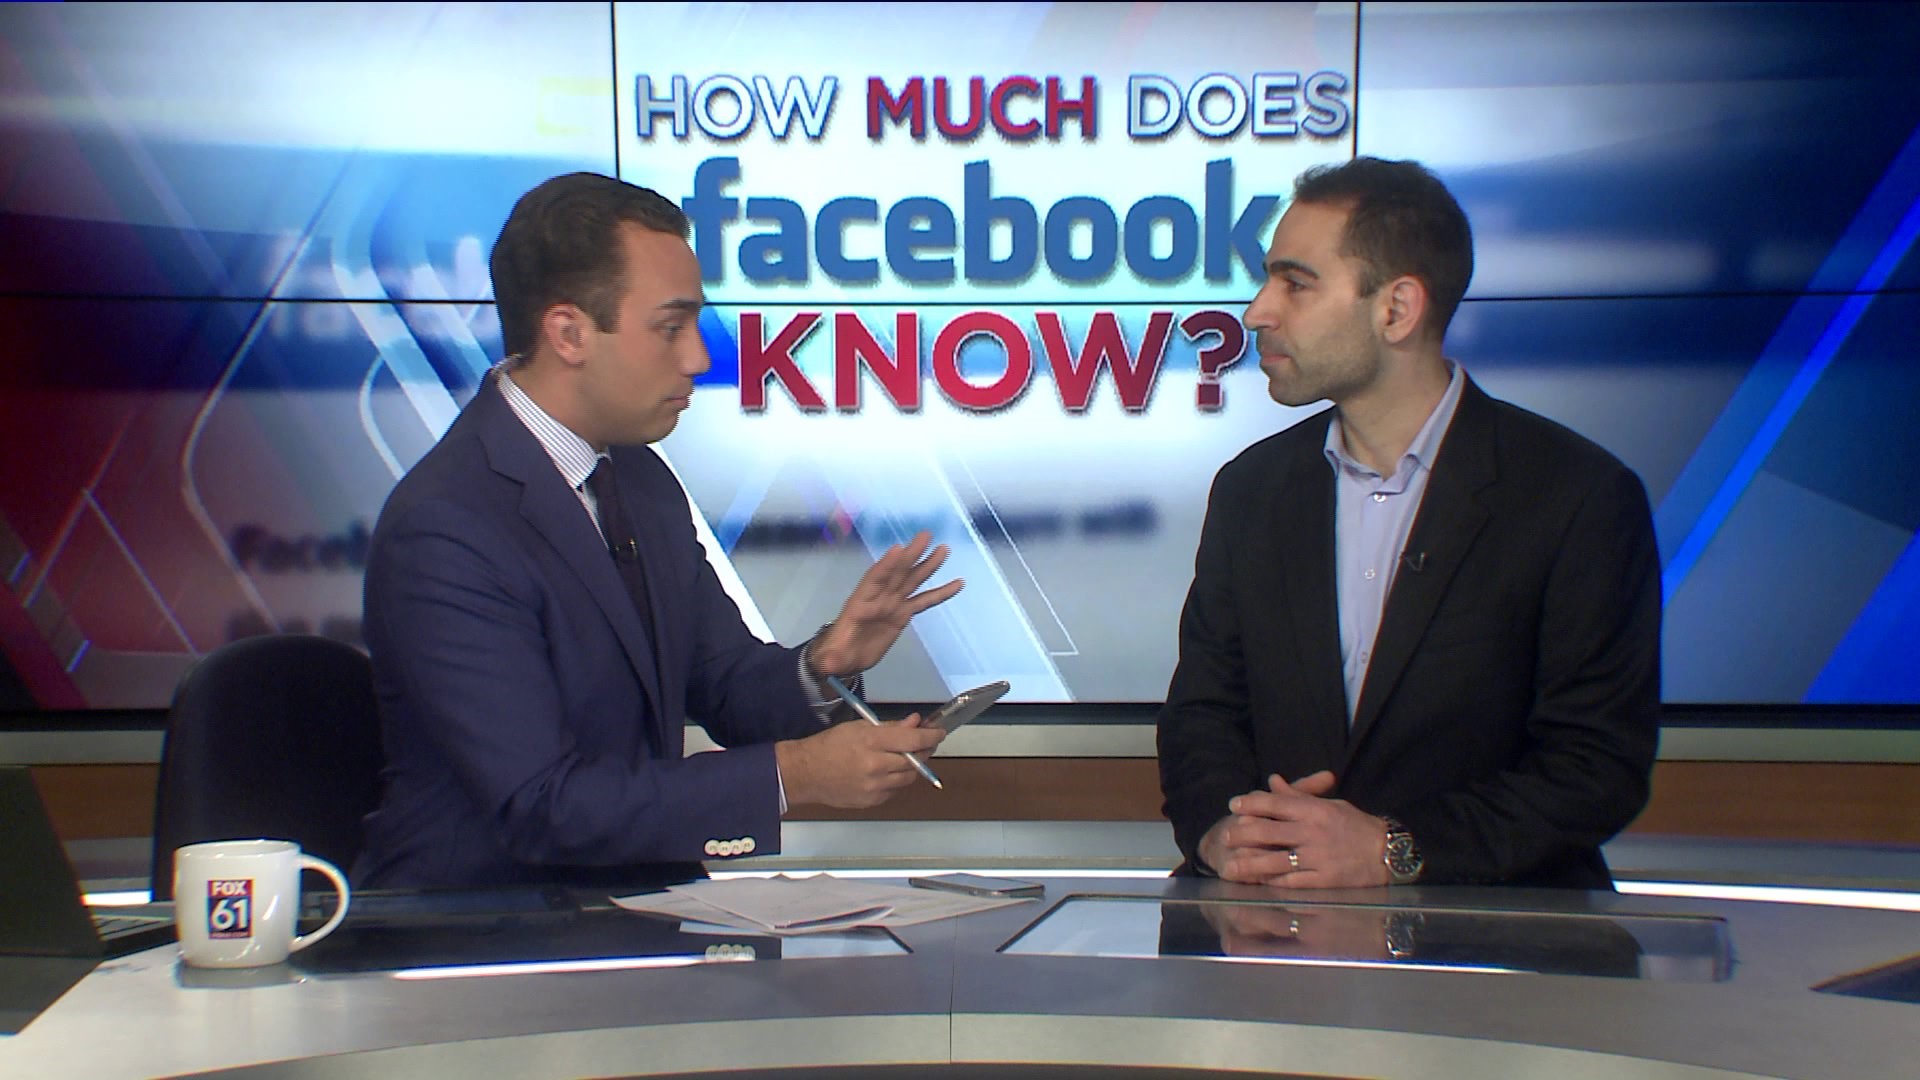 Interview - How much does Facebook know?